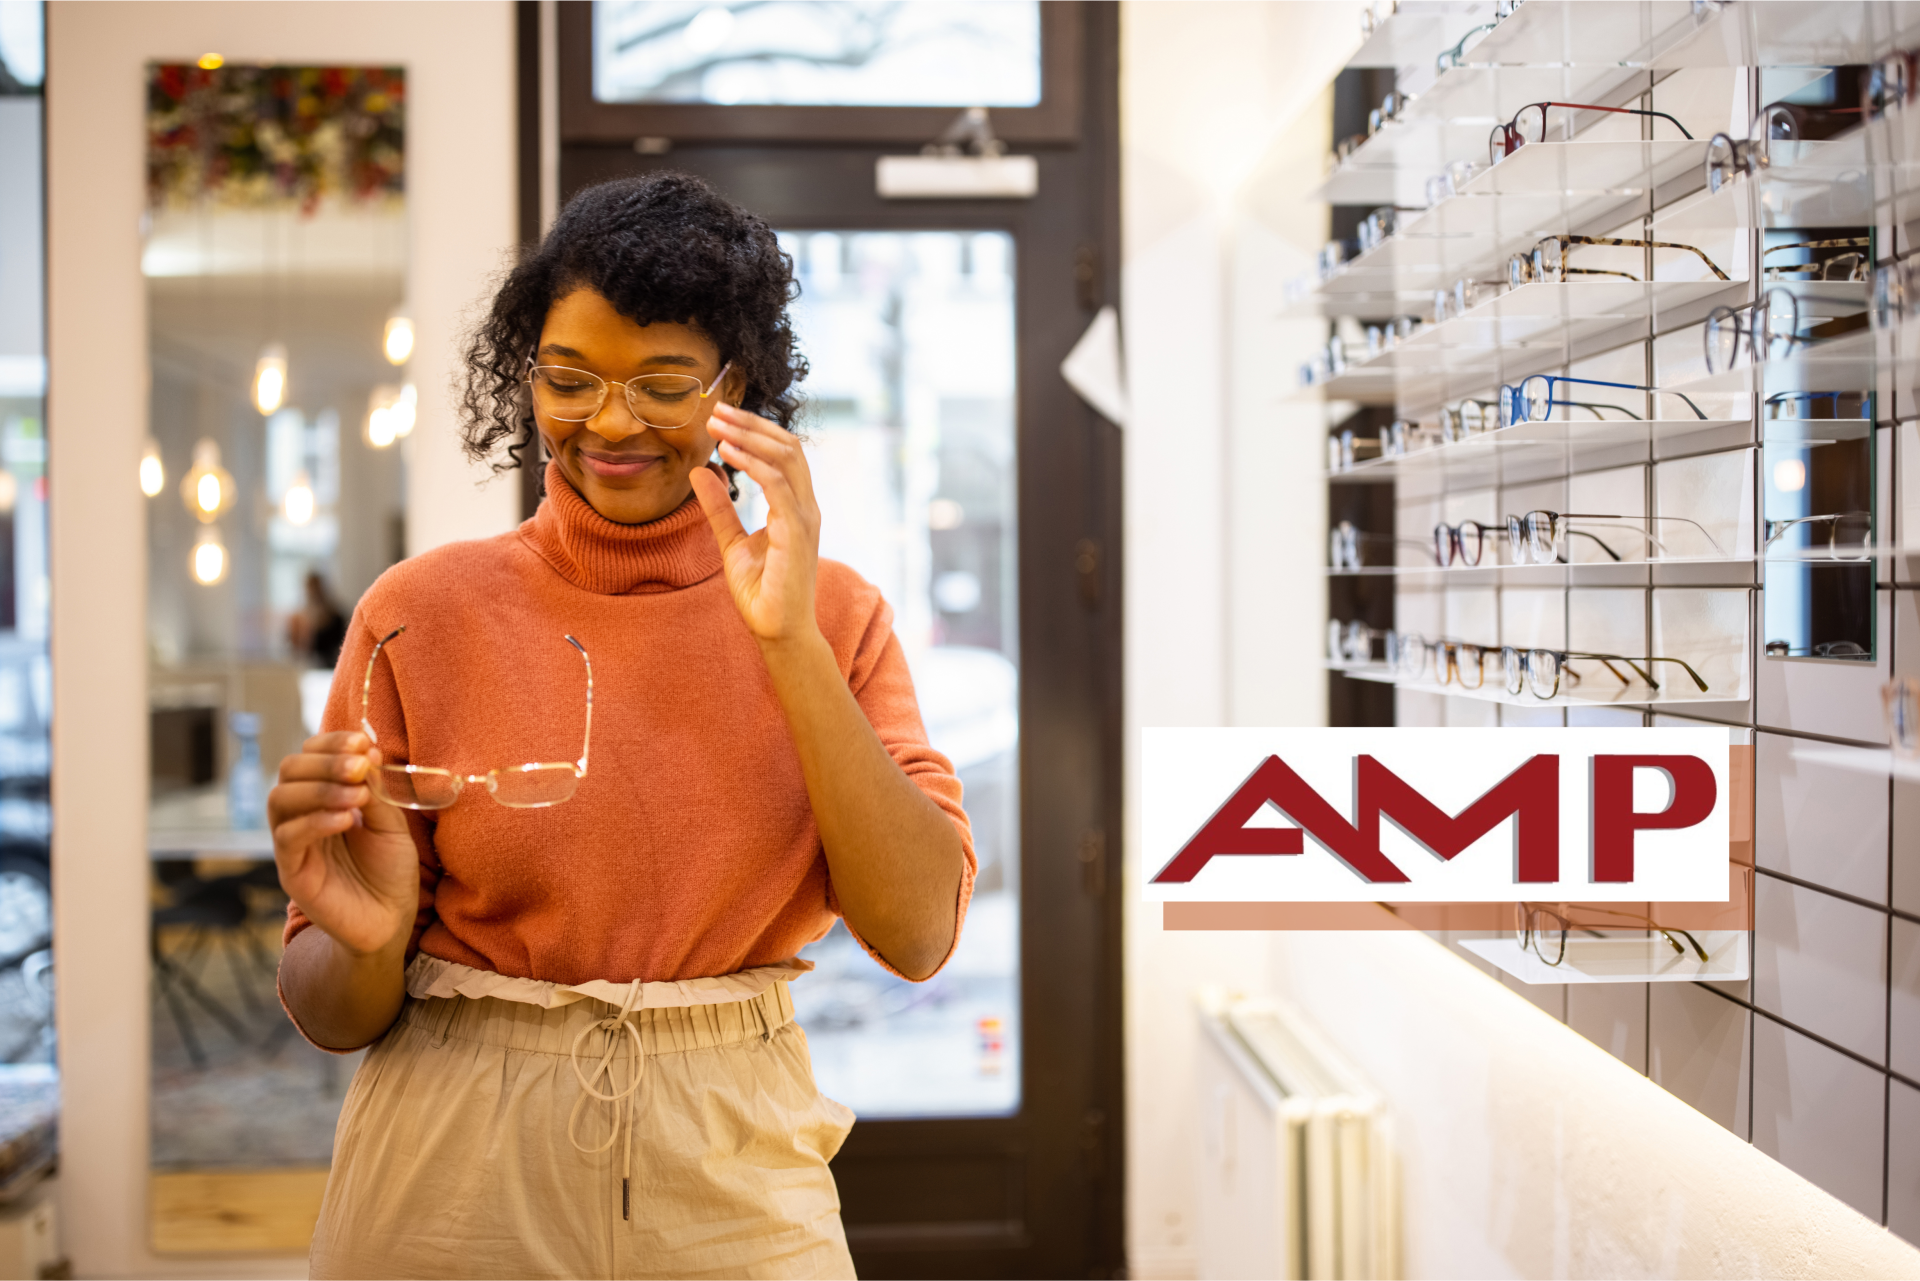 Woman shopping for glasses with AMP logo